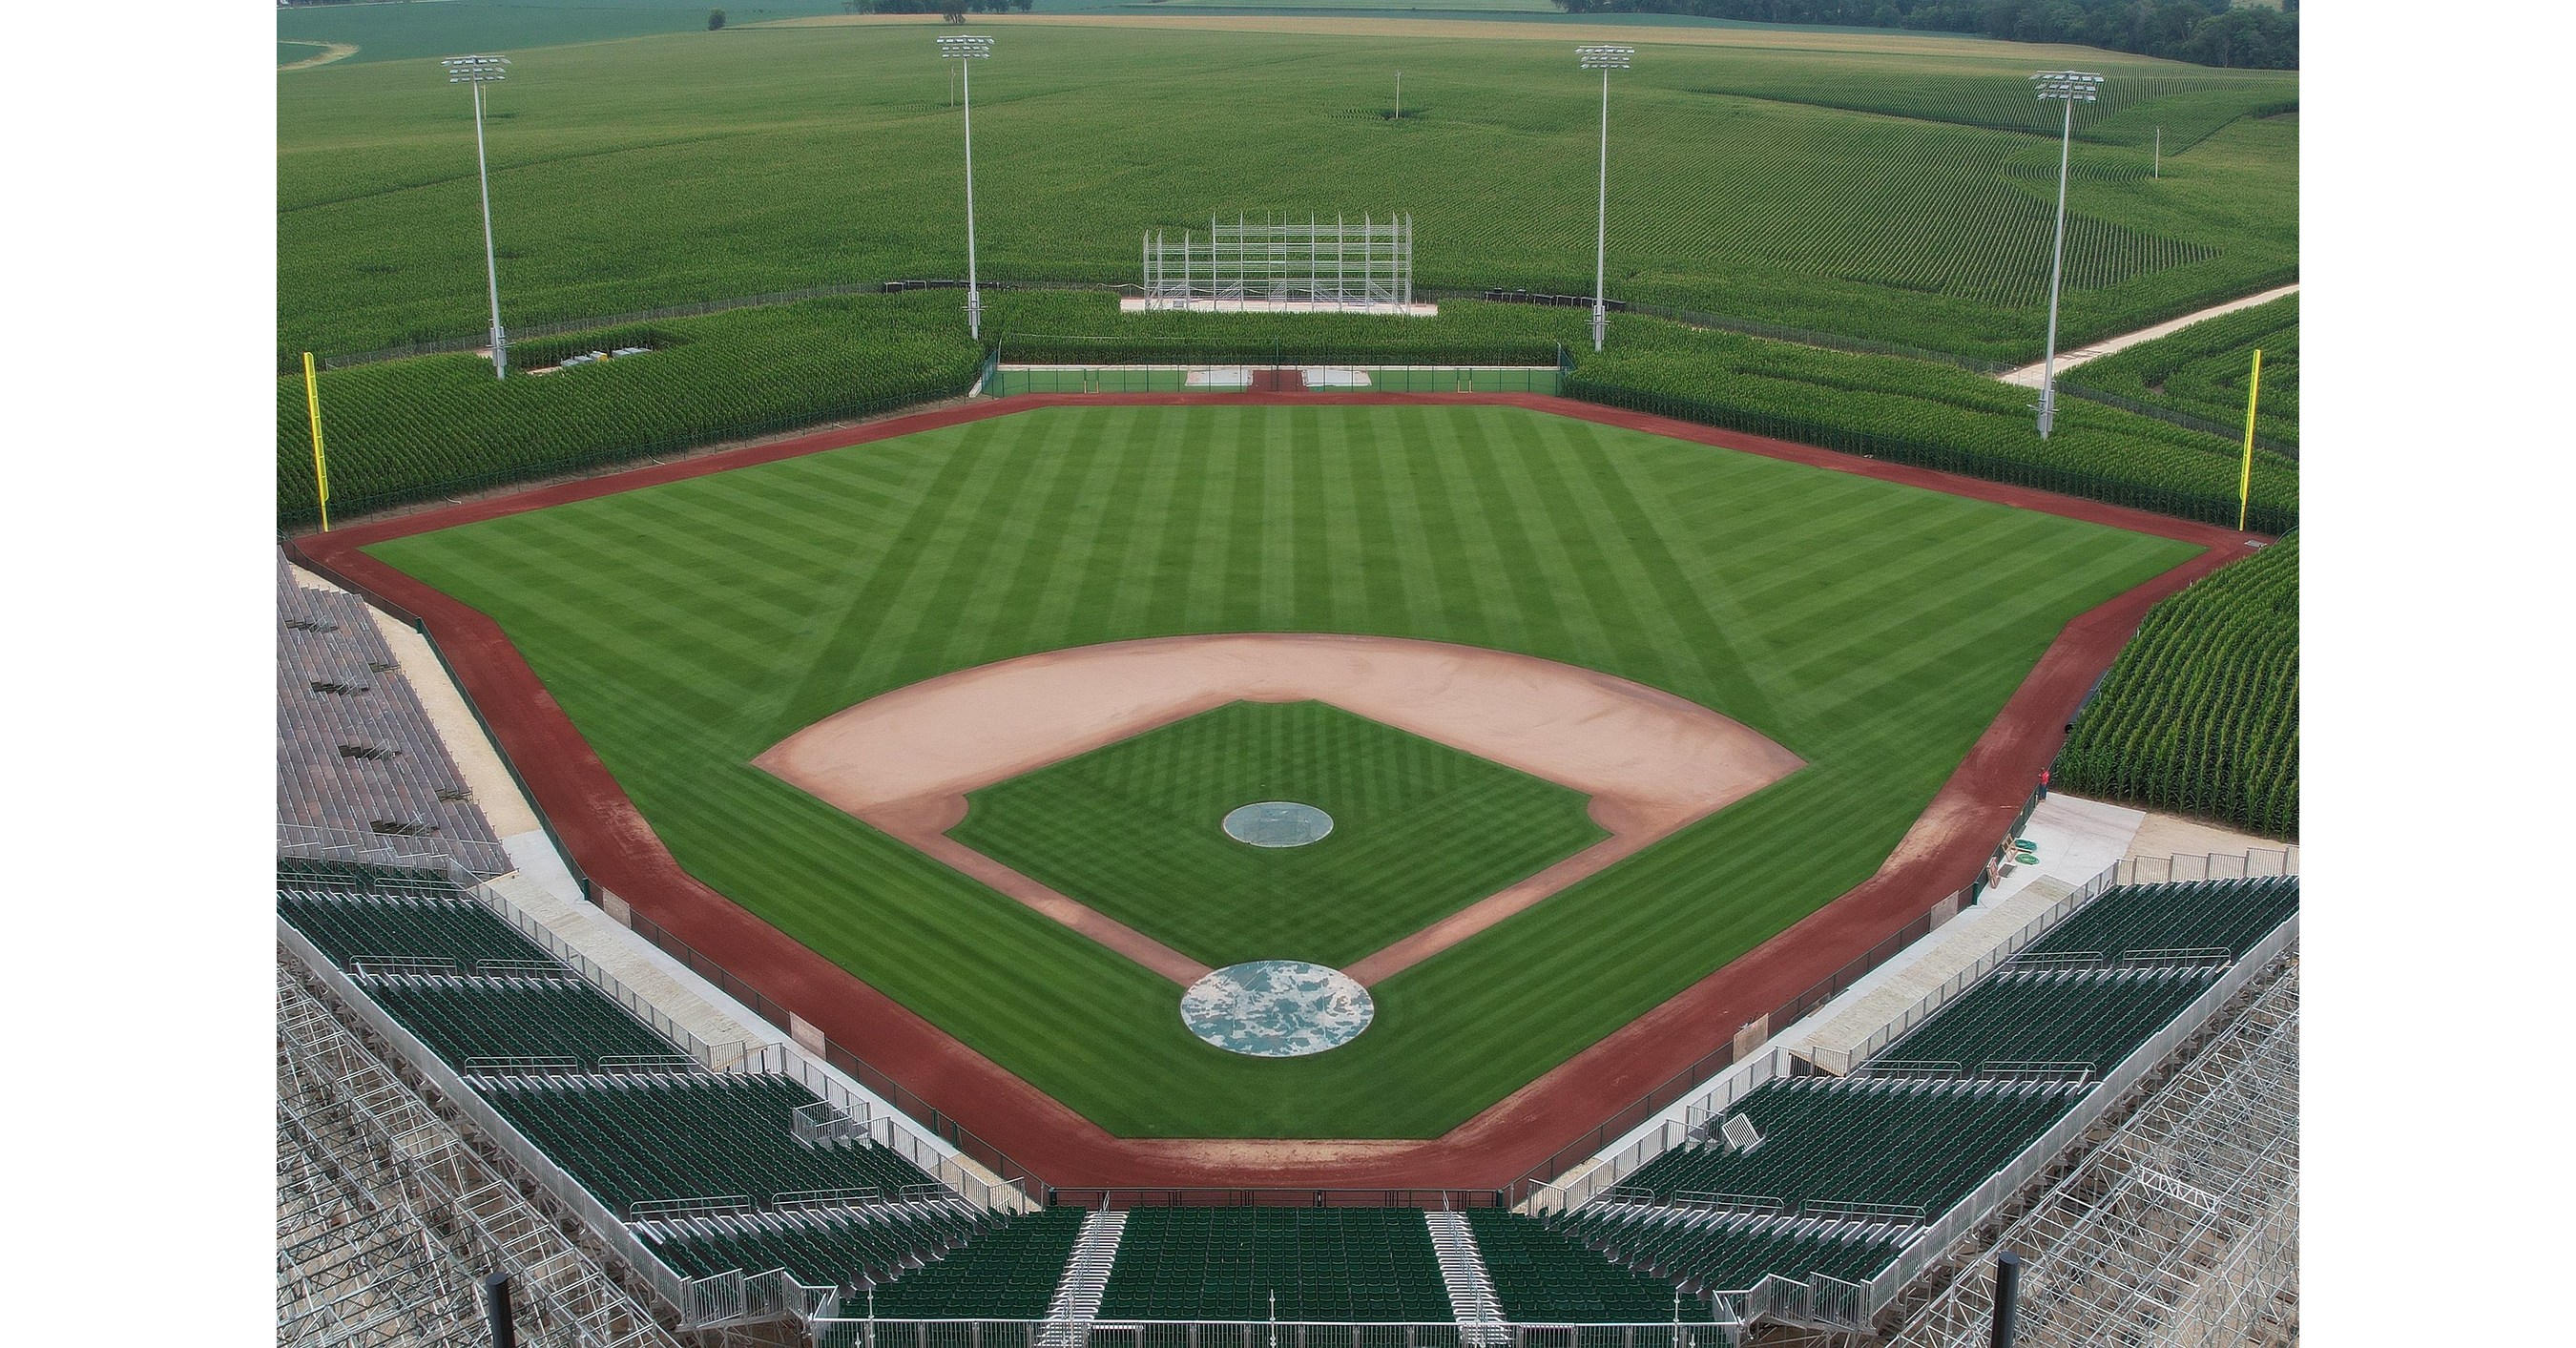 Building the ultimate Field of Dreams